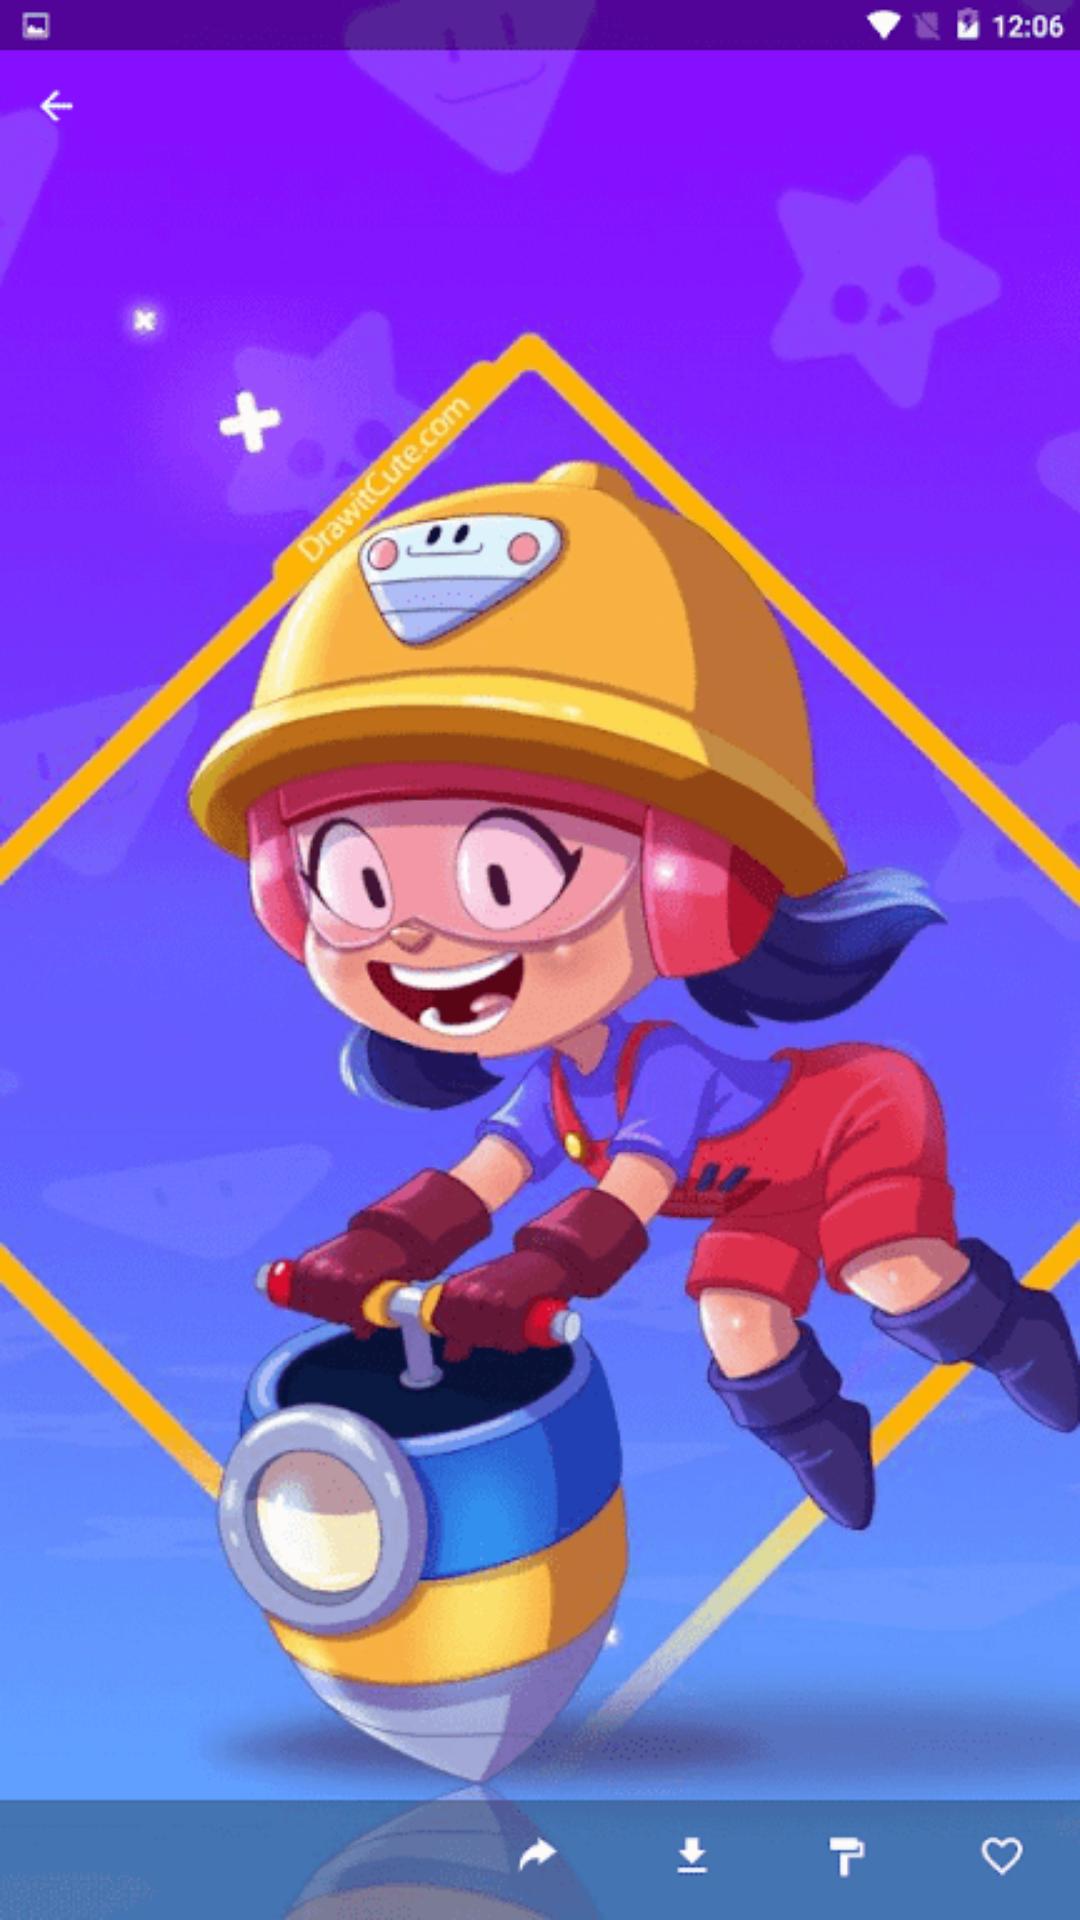 Free Hd 4k Wallpapers For Brawl Stars 2020 For Android Apk Download - brawl stars walpaprer